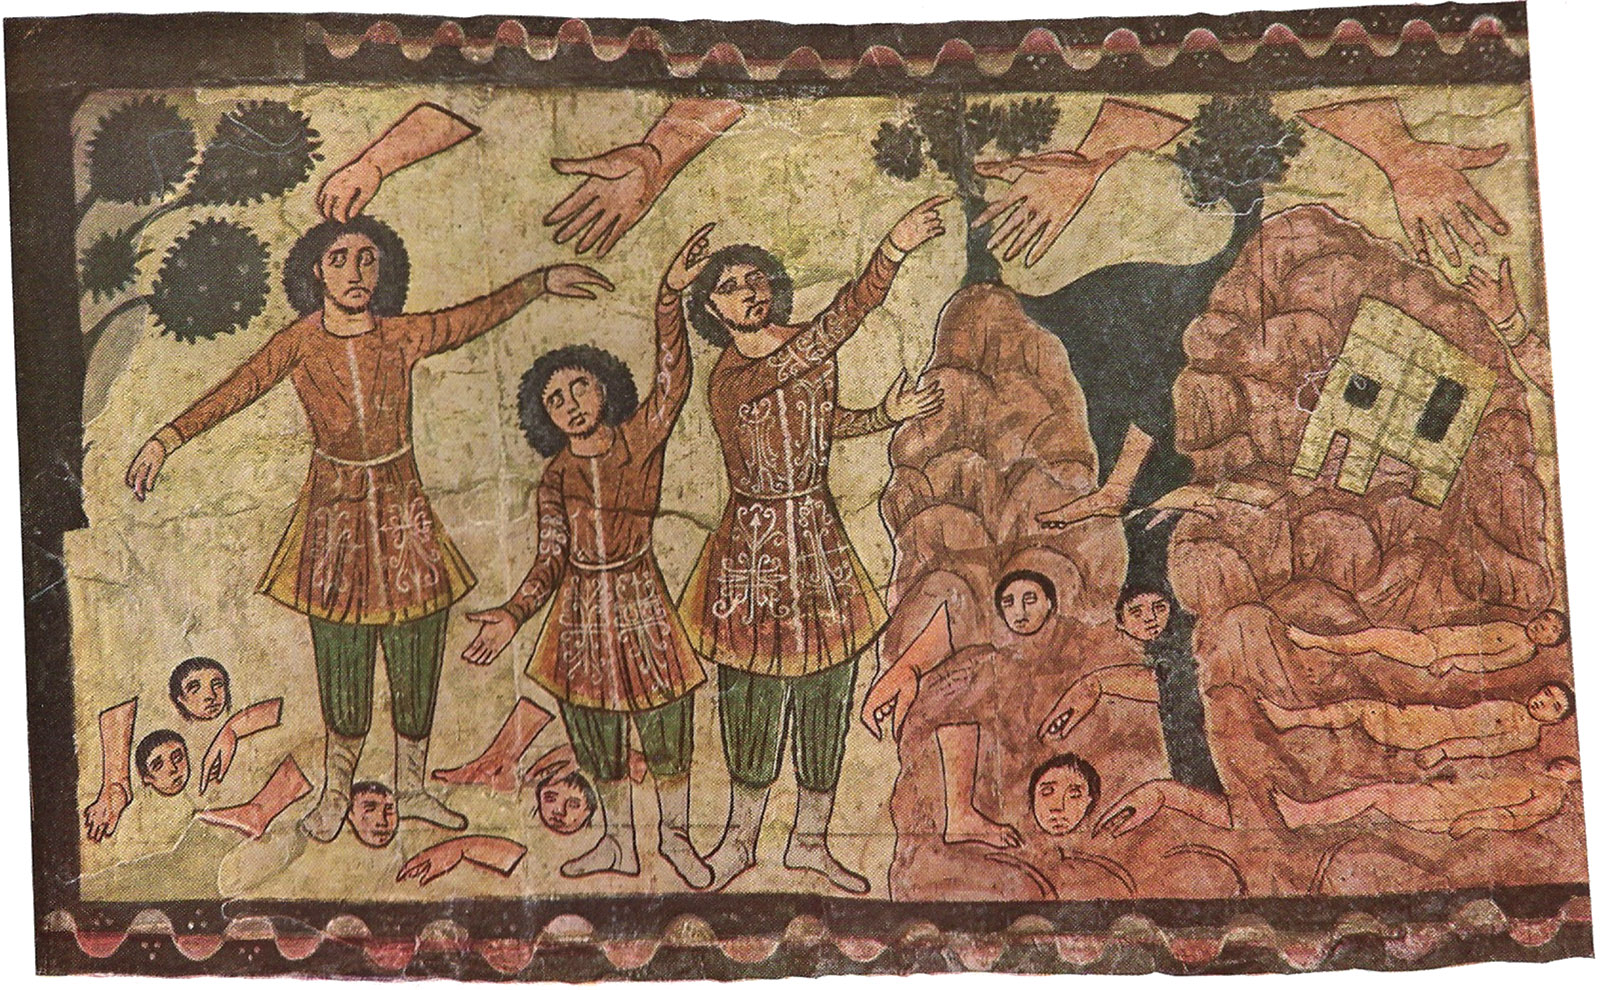 Ezekiel and the hand of God; fresco from the synagogue in Dura Europos, Syria